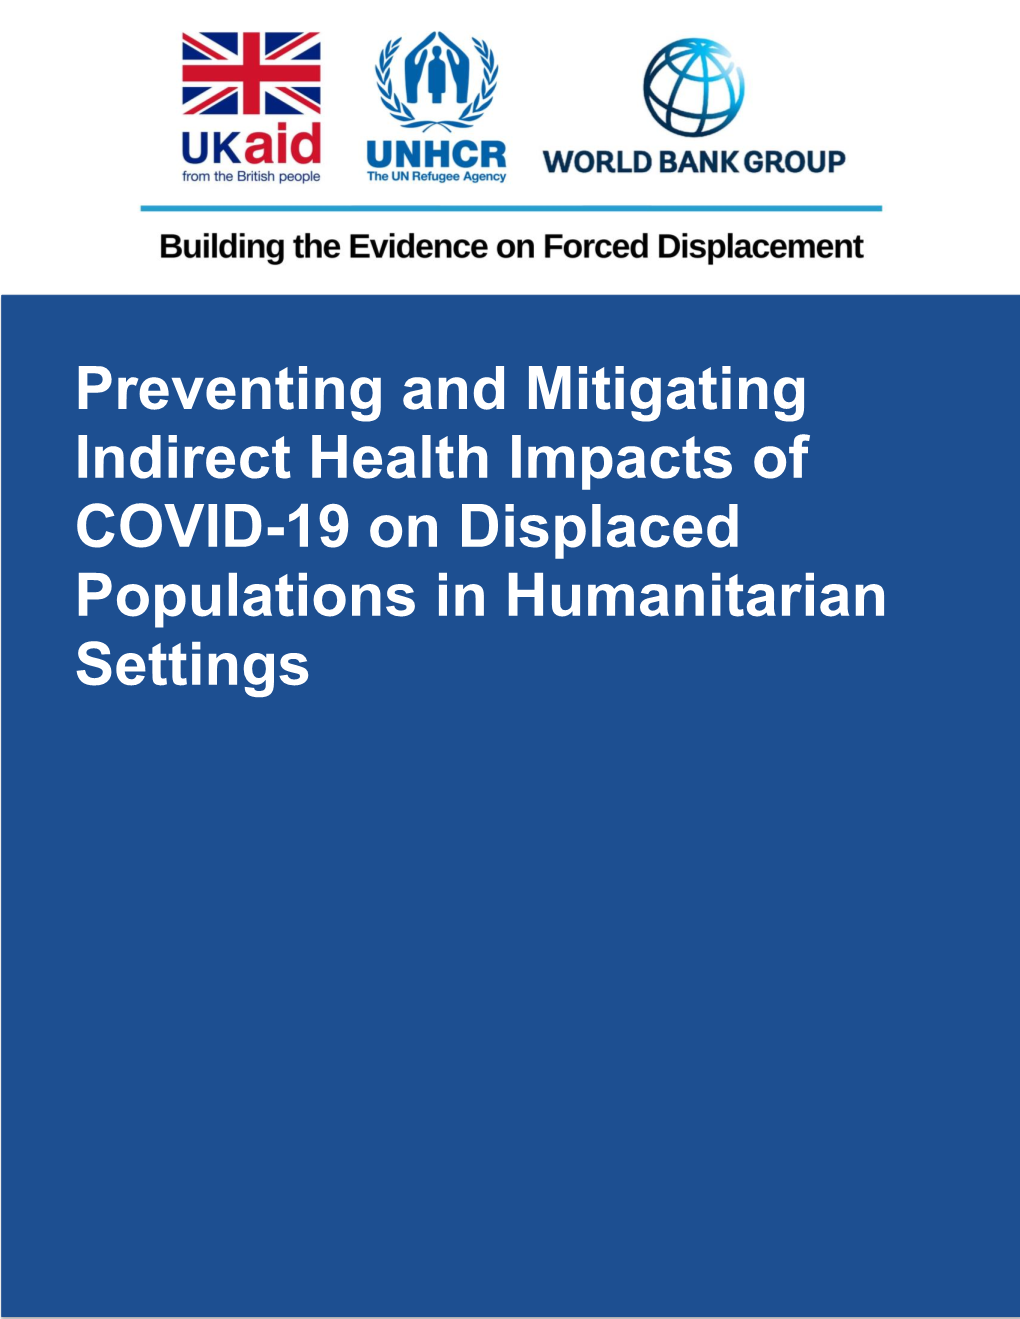 Preventing and Mitigating Indirect Health Impacts of COVID-19 on Displaced Populations in Humanitarian Settings